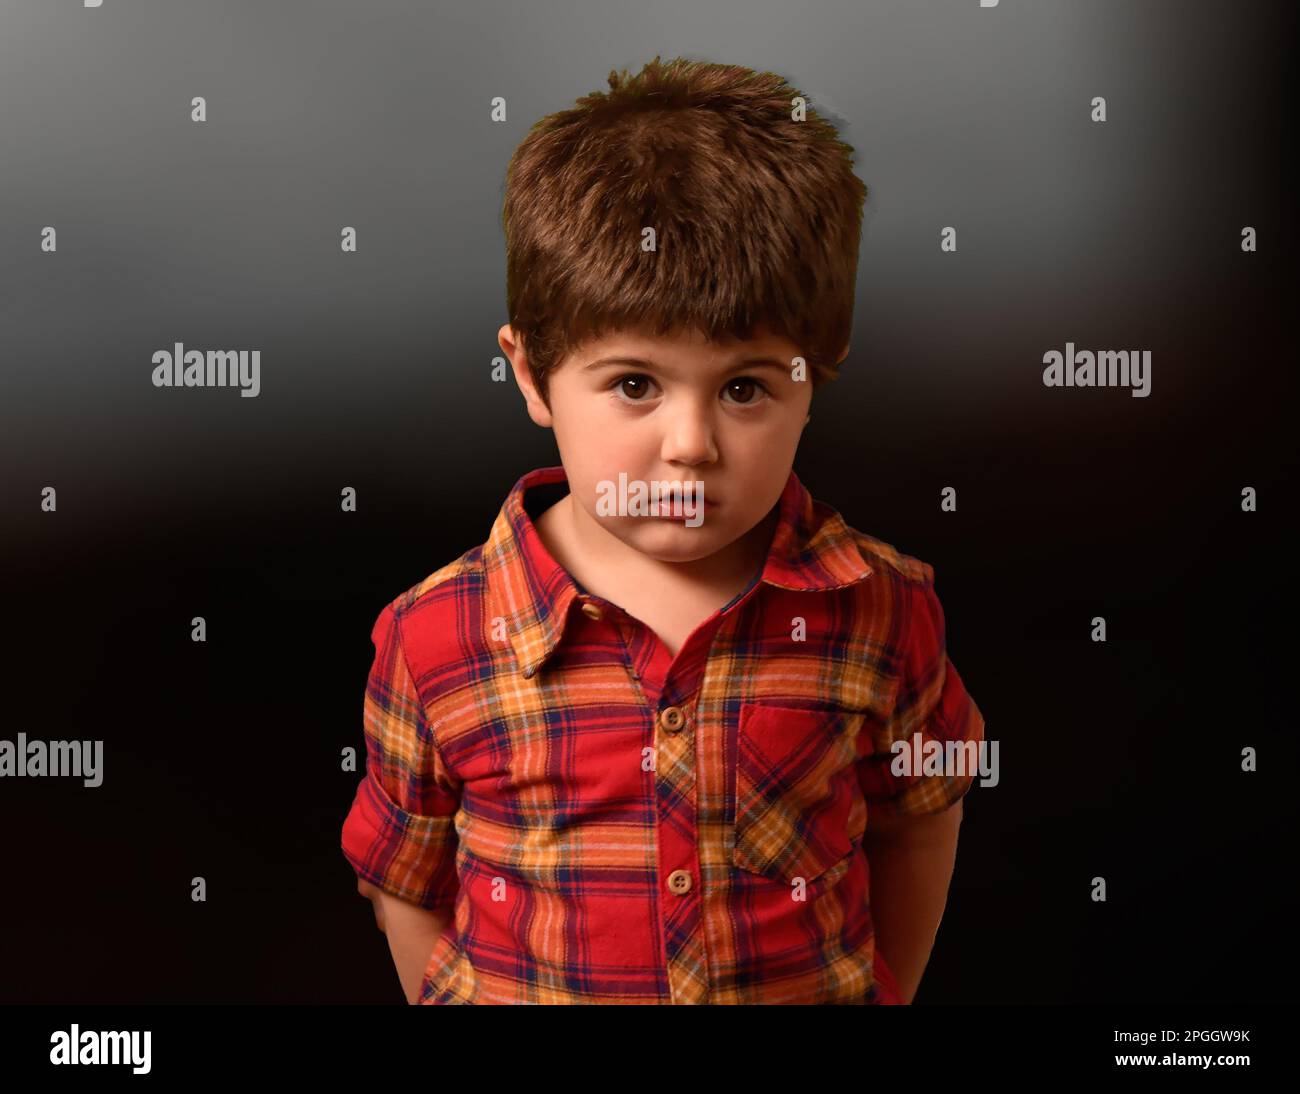 Portrait of 4-year-old boy Stock Photo